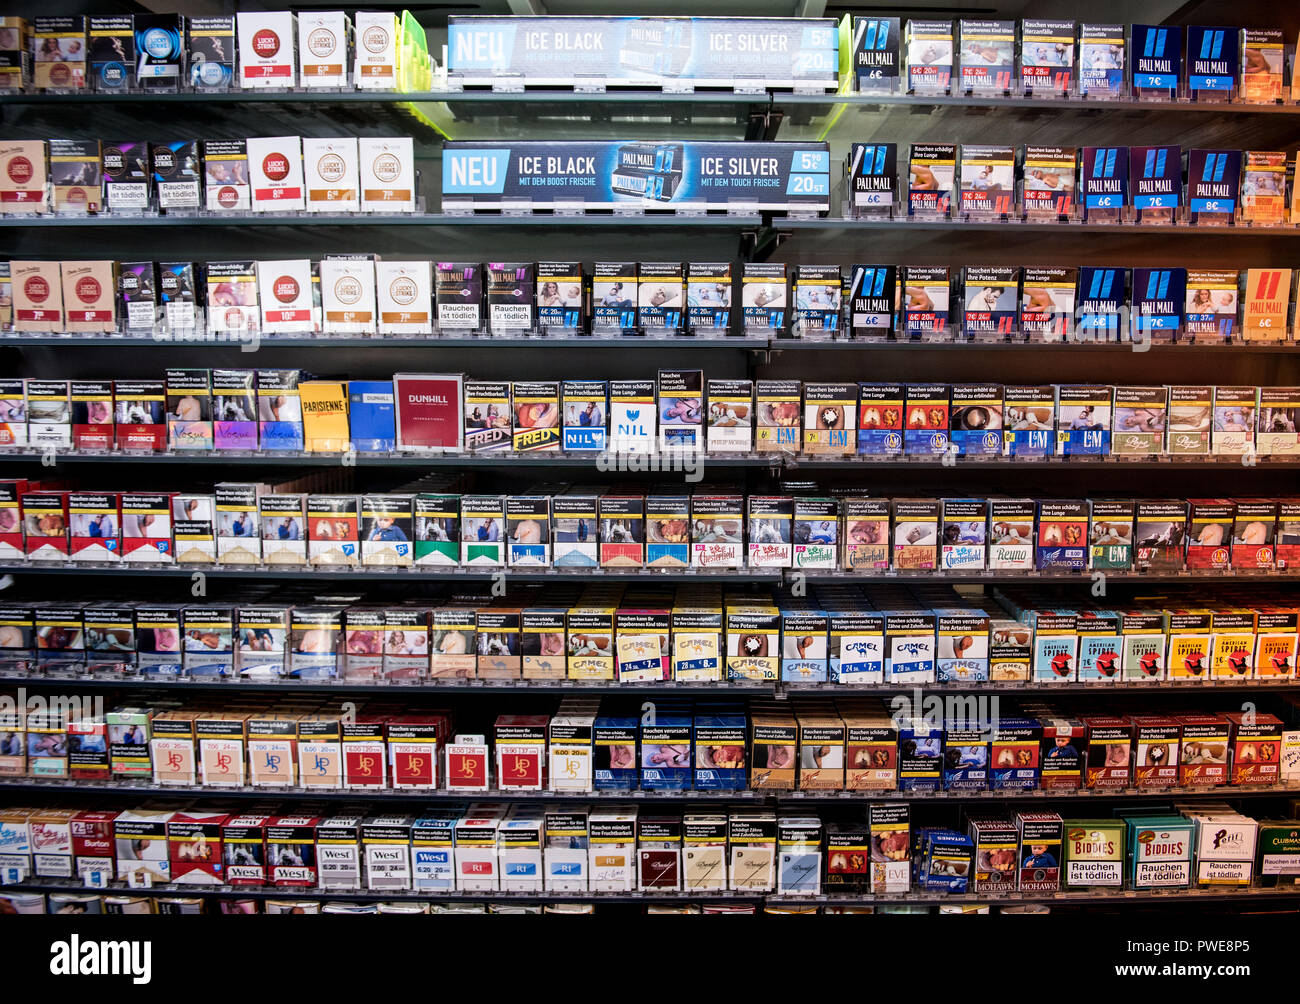 15 October 2018, Hamburg: Numerous cigarette packs are available in a kiosk on the shelf. In the third quarter, the production of tobacco products declined. According to the Federal Statistical Office, 19.78 billion cigarettes were taxed, about 3.6 percent less than in the same period last year. Photo: Daniel Bockwoldt/dpa Stock Photo